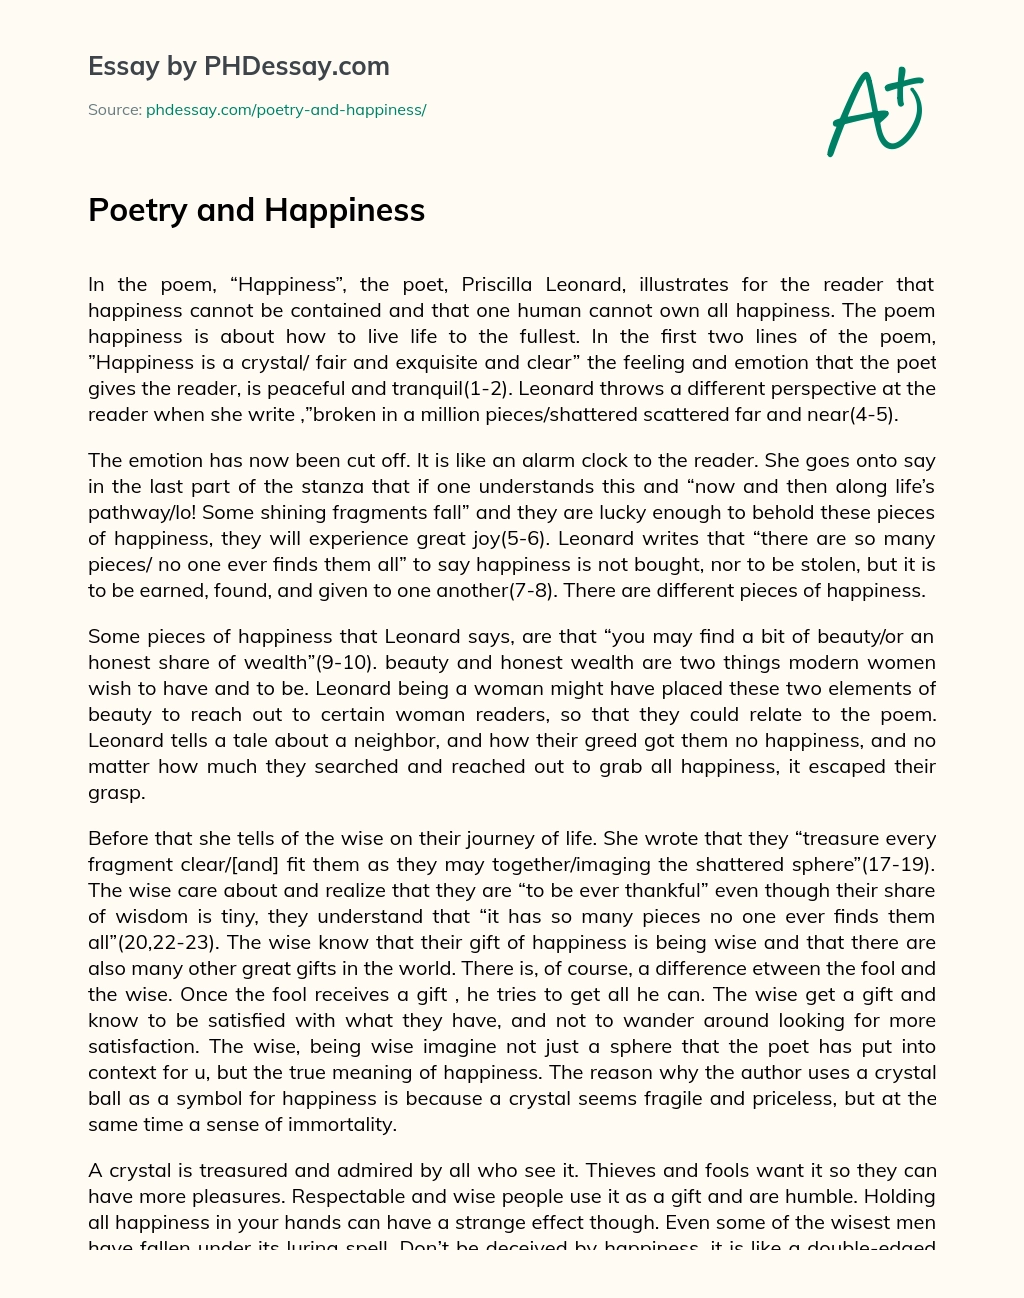 Poetry and Happiness essay